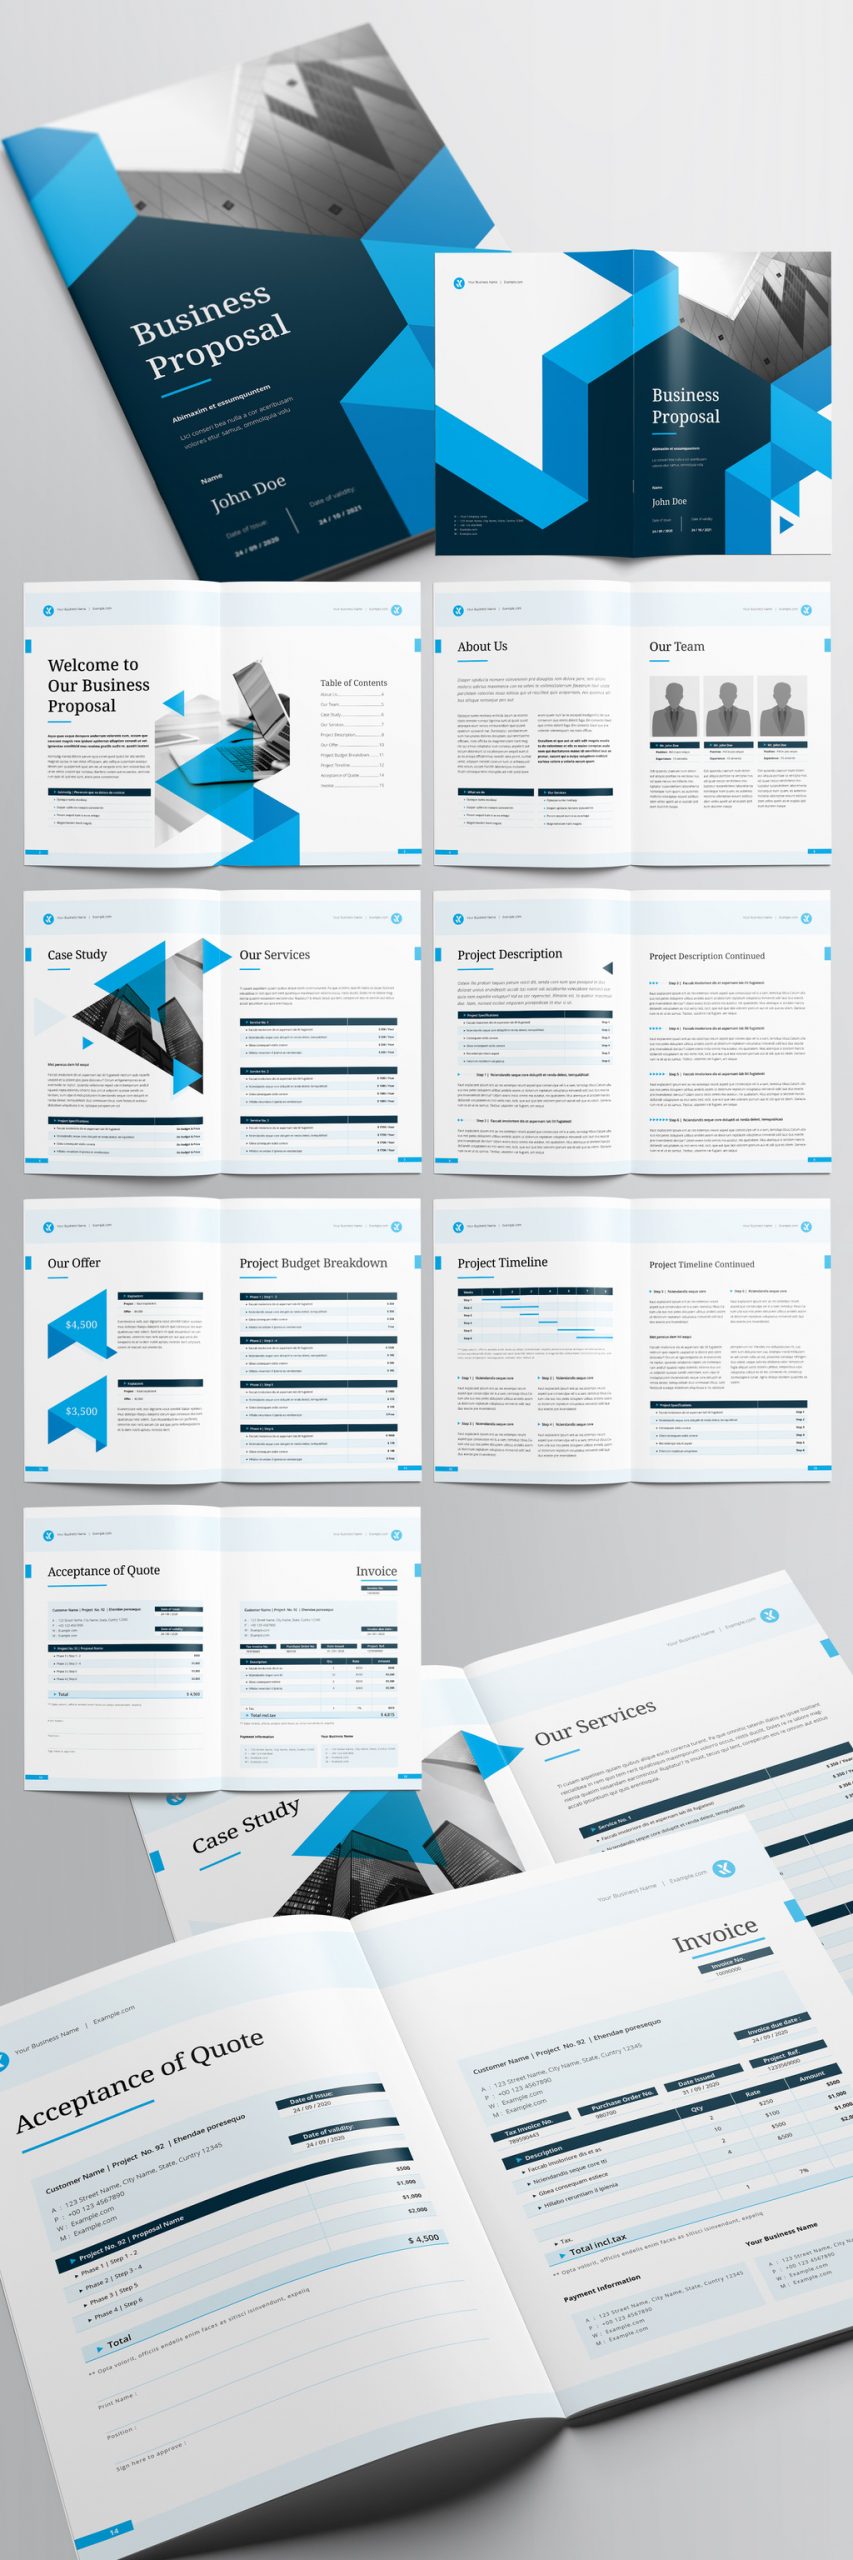 Business Proposal Template with Blue Accents Within Business Proposal Template Indesign